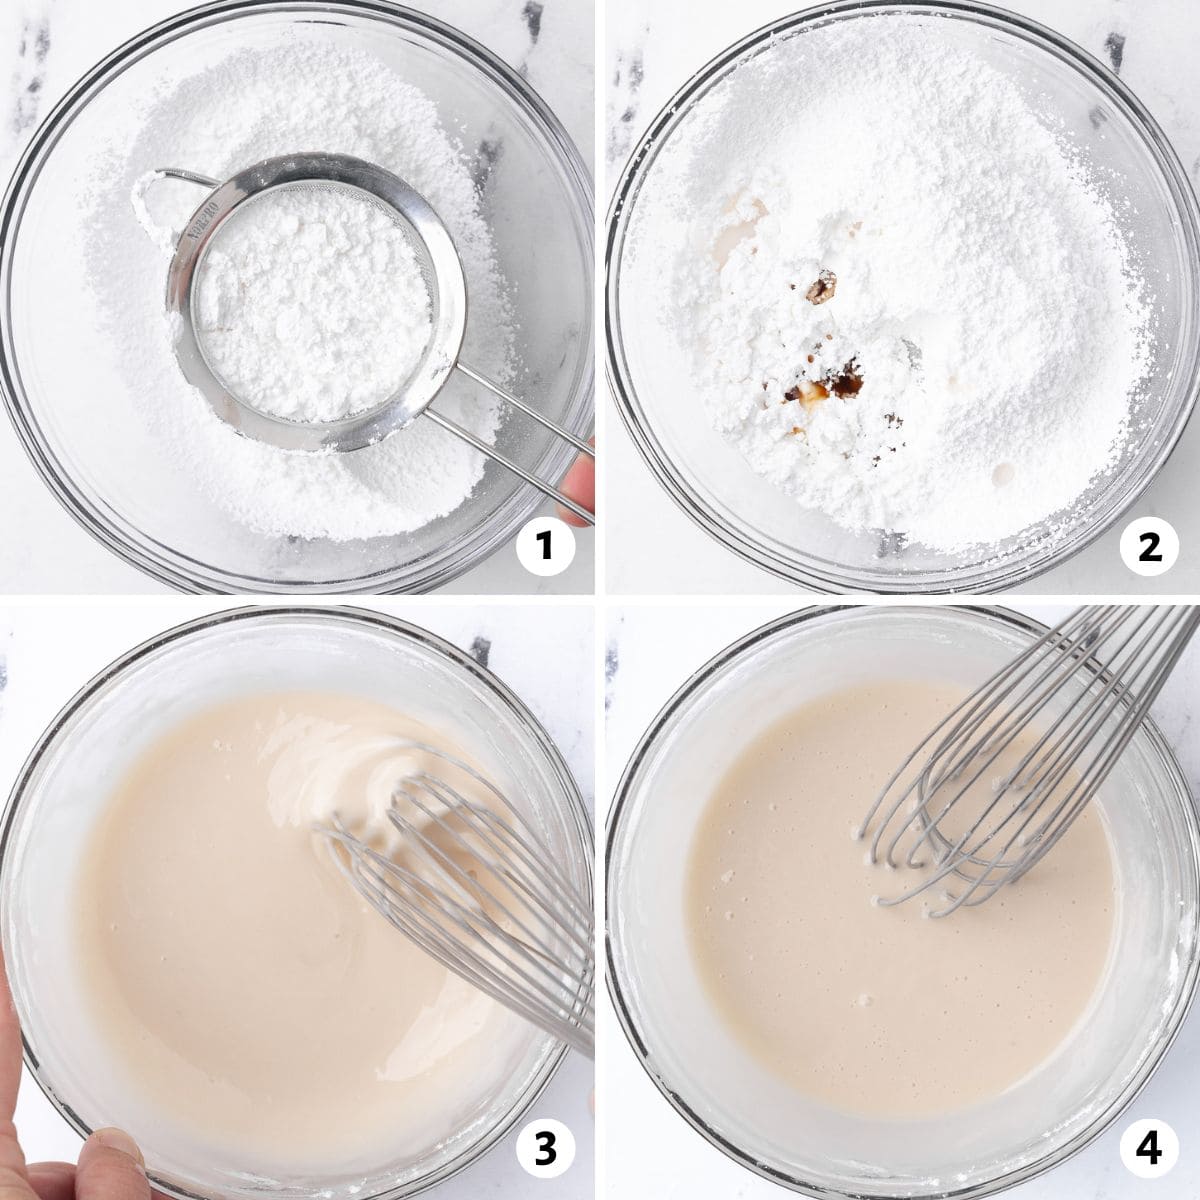 4 image collage making recipe: 1- powdered sugar being sifted in a bowl, 2- vanilla and milk added before combined, 3- whisking together, 4- after fully combined.